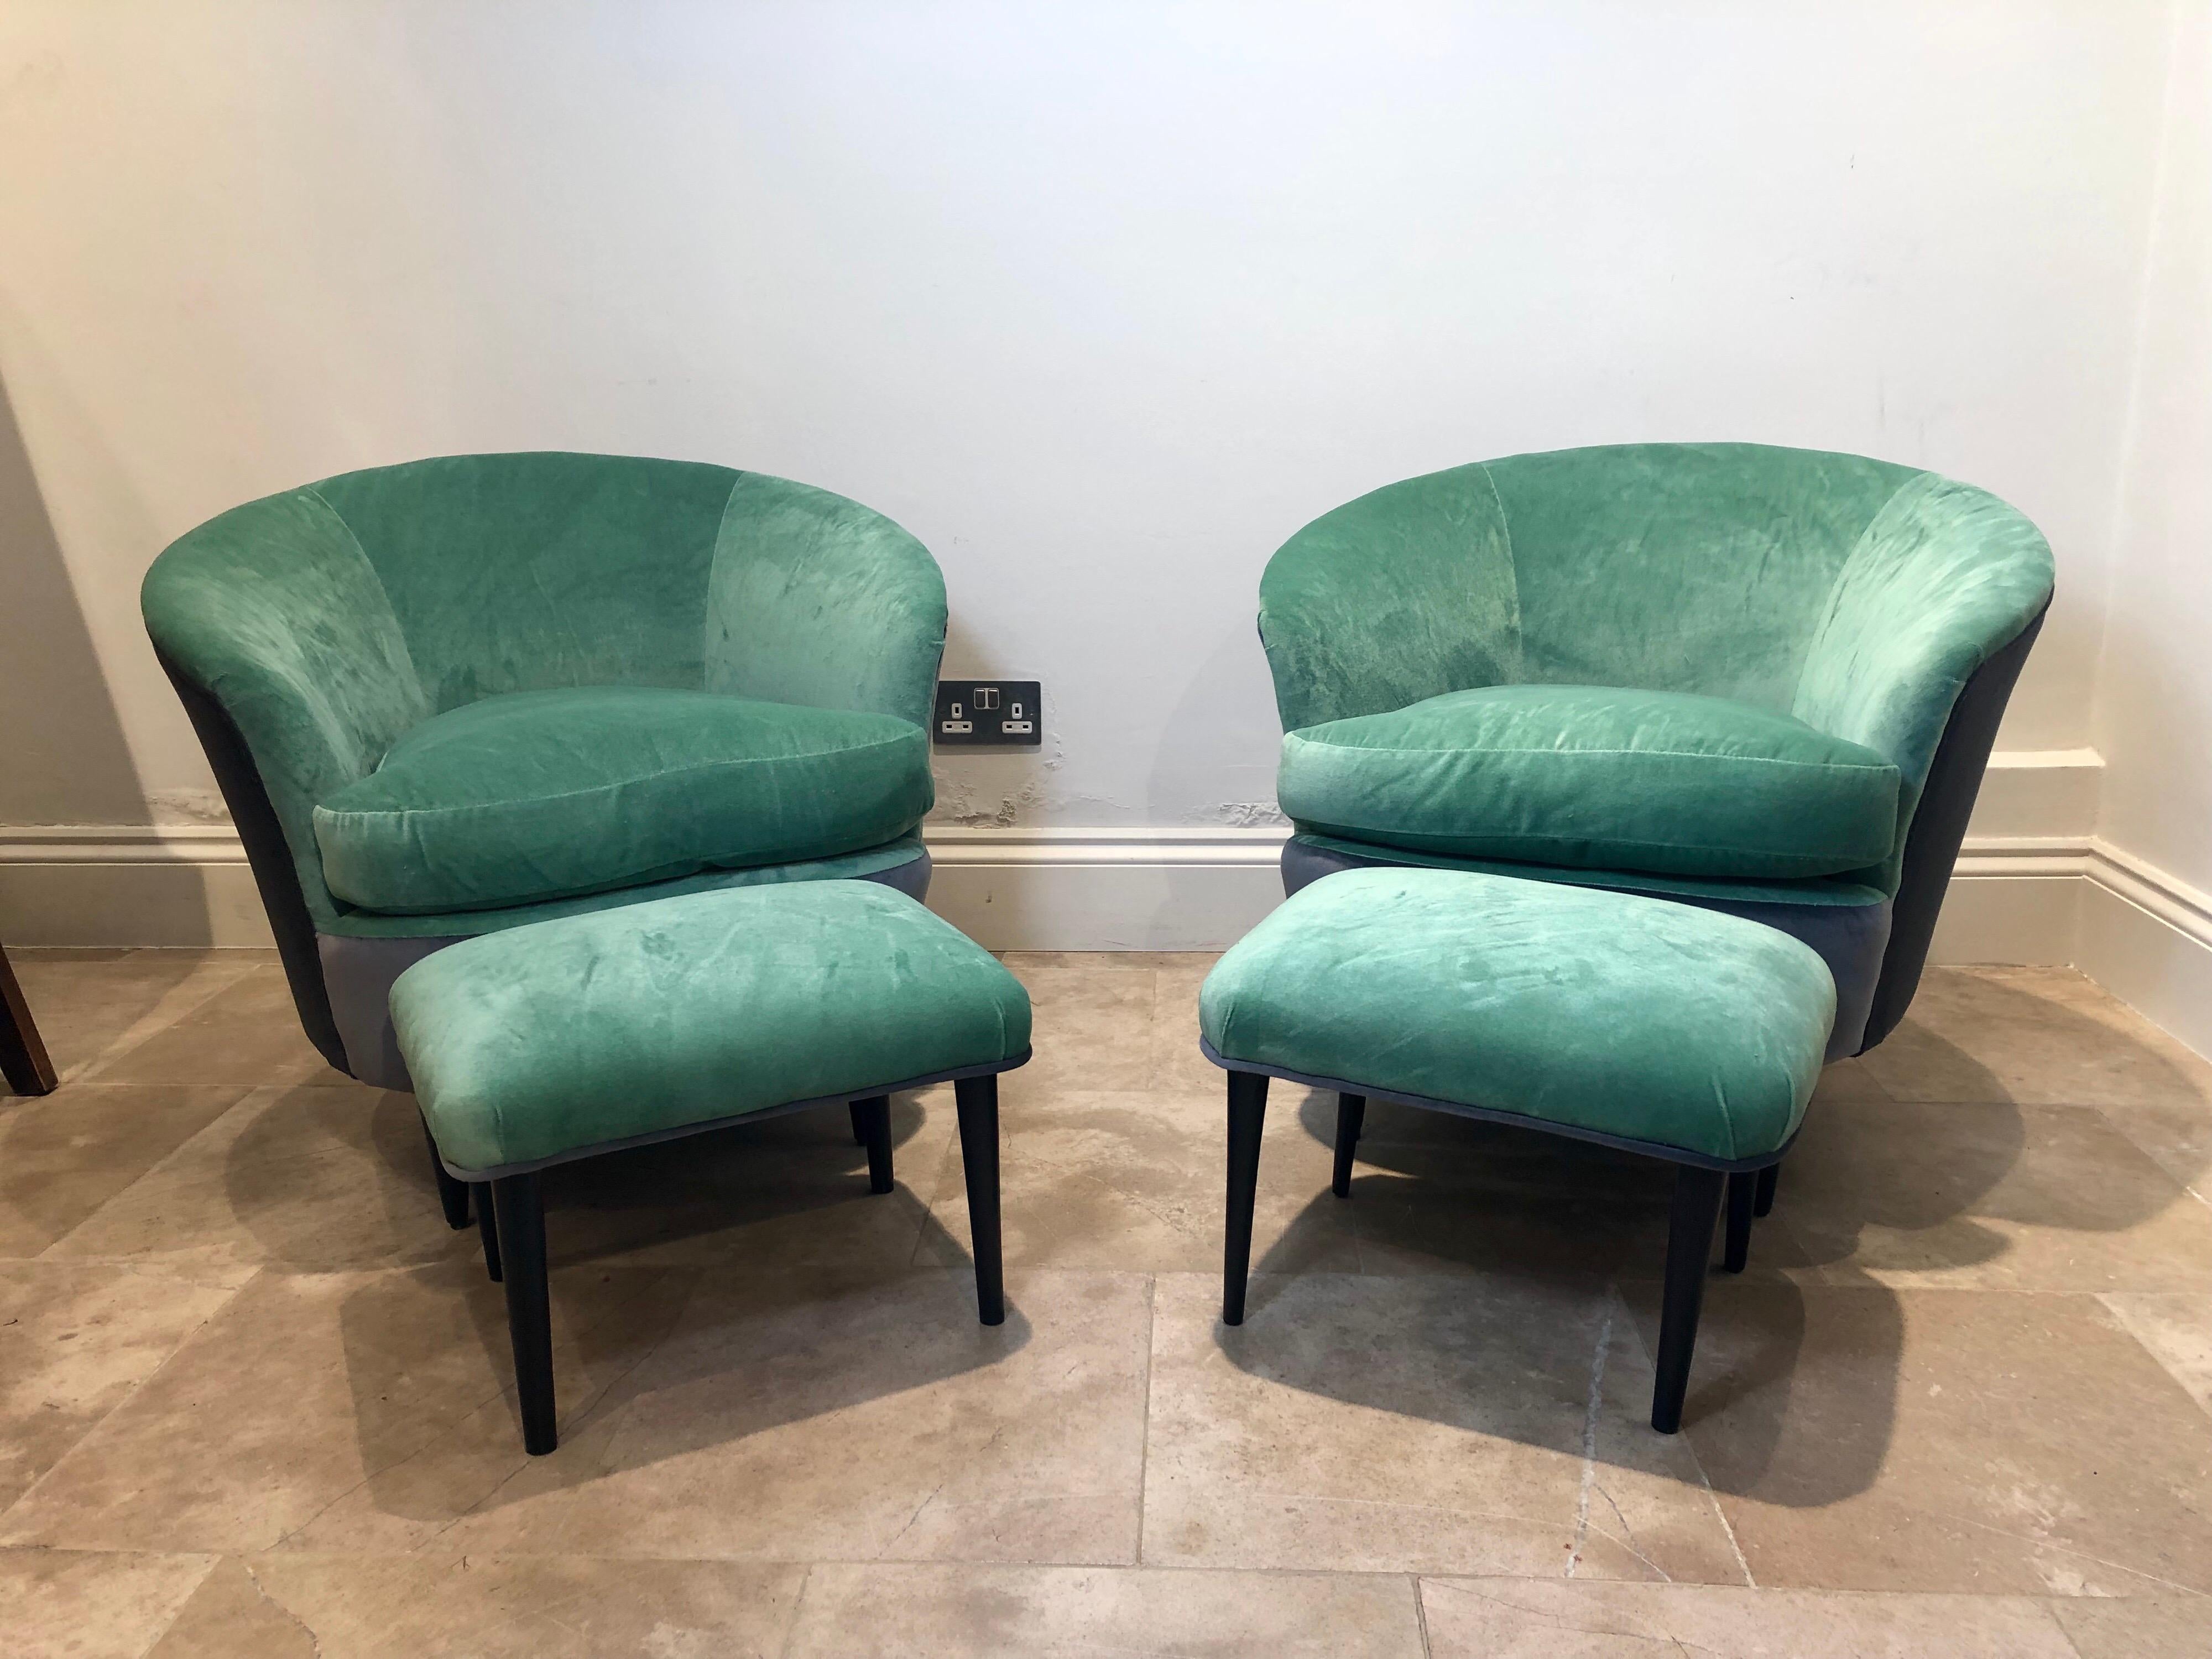 A lovely pair of curved Italian small armchairs with matching stools that have been newly upholstered in a mint green velvet. The chairs are sitting on ebonised legs as are the stools.
The measurements of the stools are W 48cm x D 38cm x H 32cm.